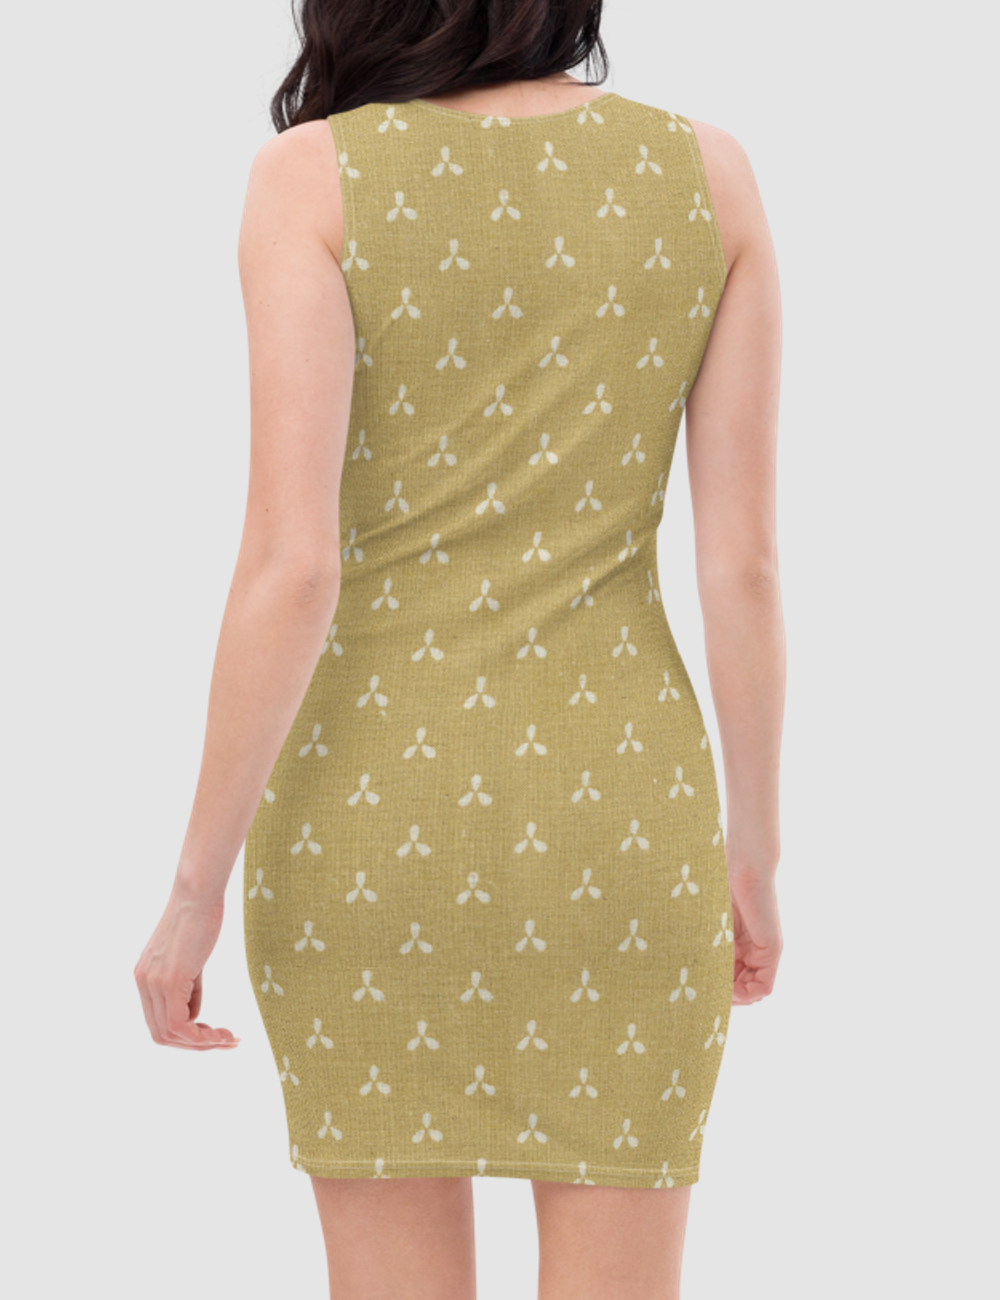 Vintage Faded Yellow Simple Floral Fabric Print | Women's Sleeveless Fitted Sublimated Dress OniTakai